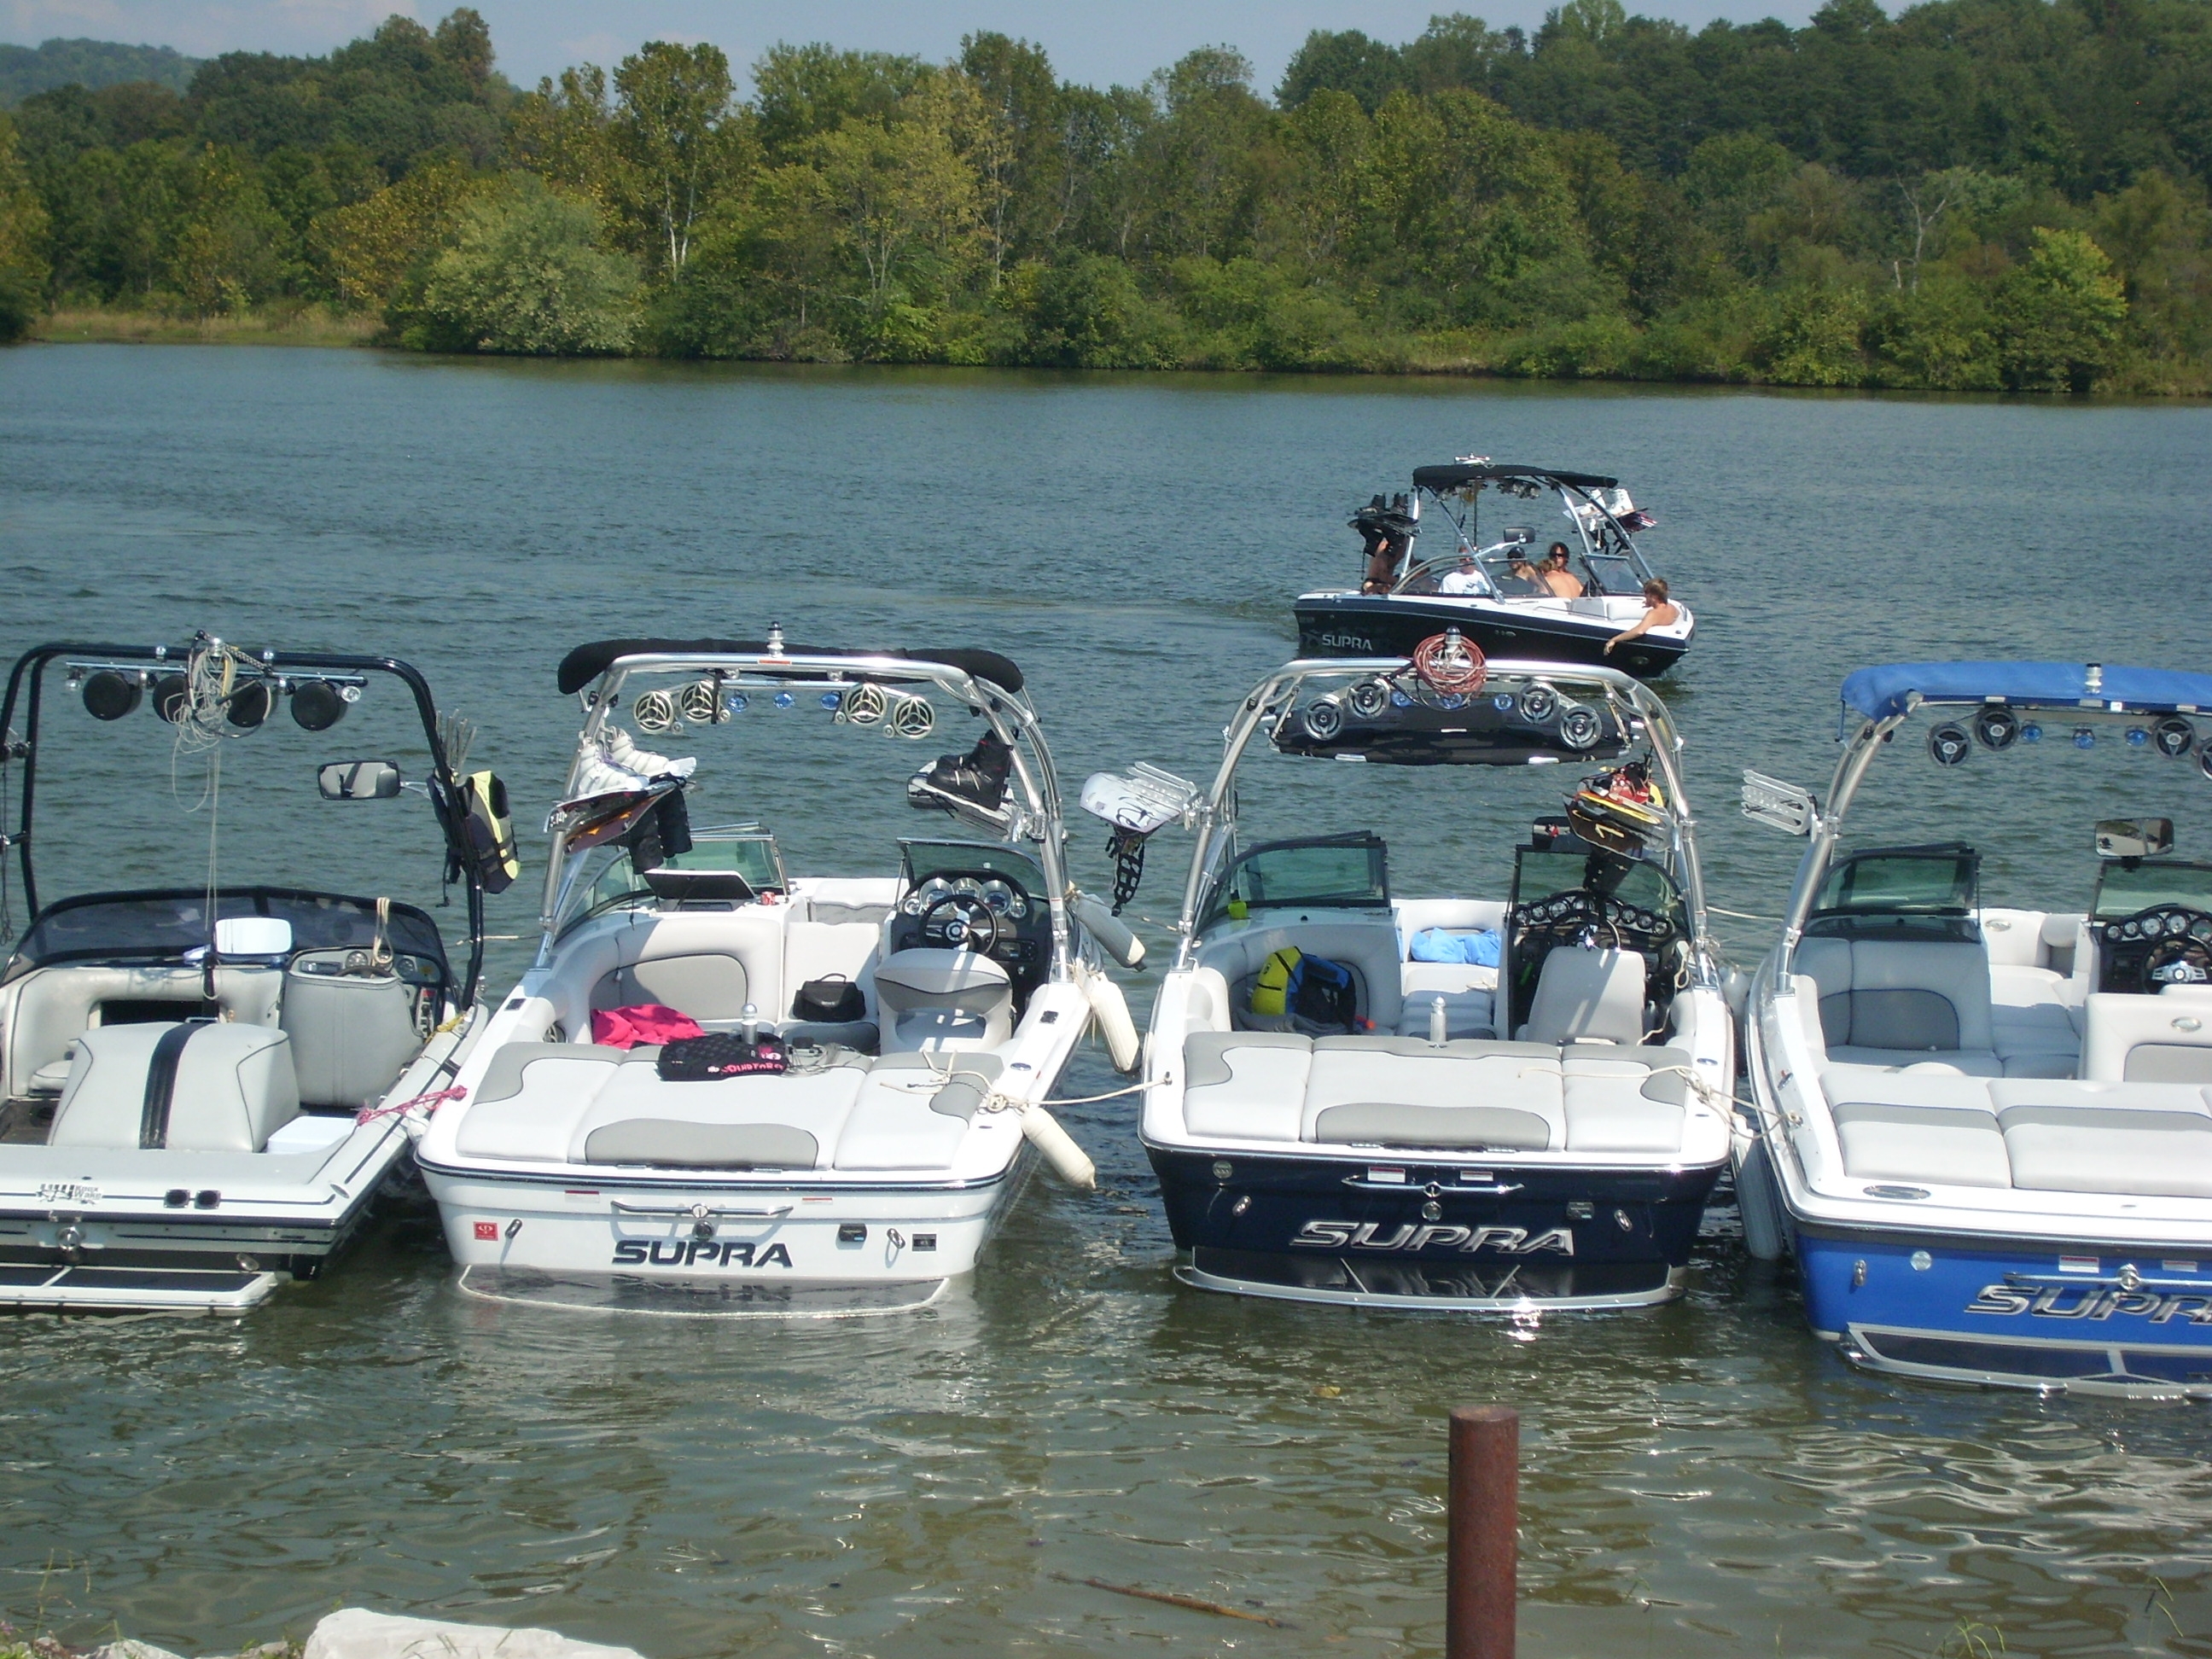 Supra and Moomba boat owners' reunion on Melton Lake